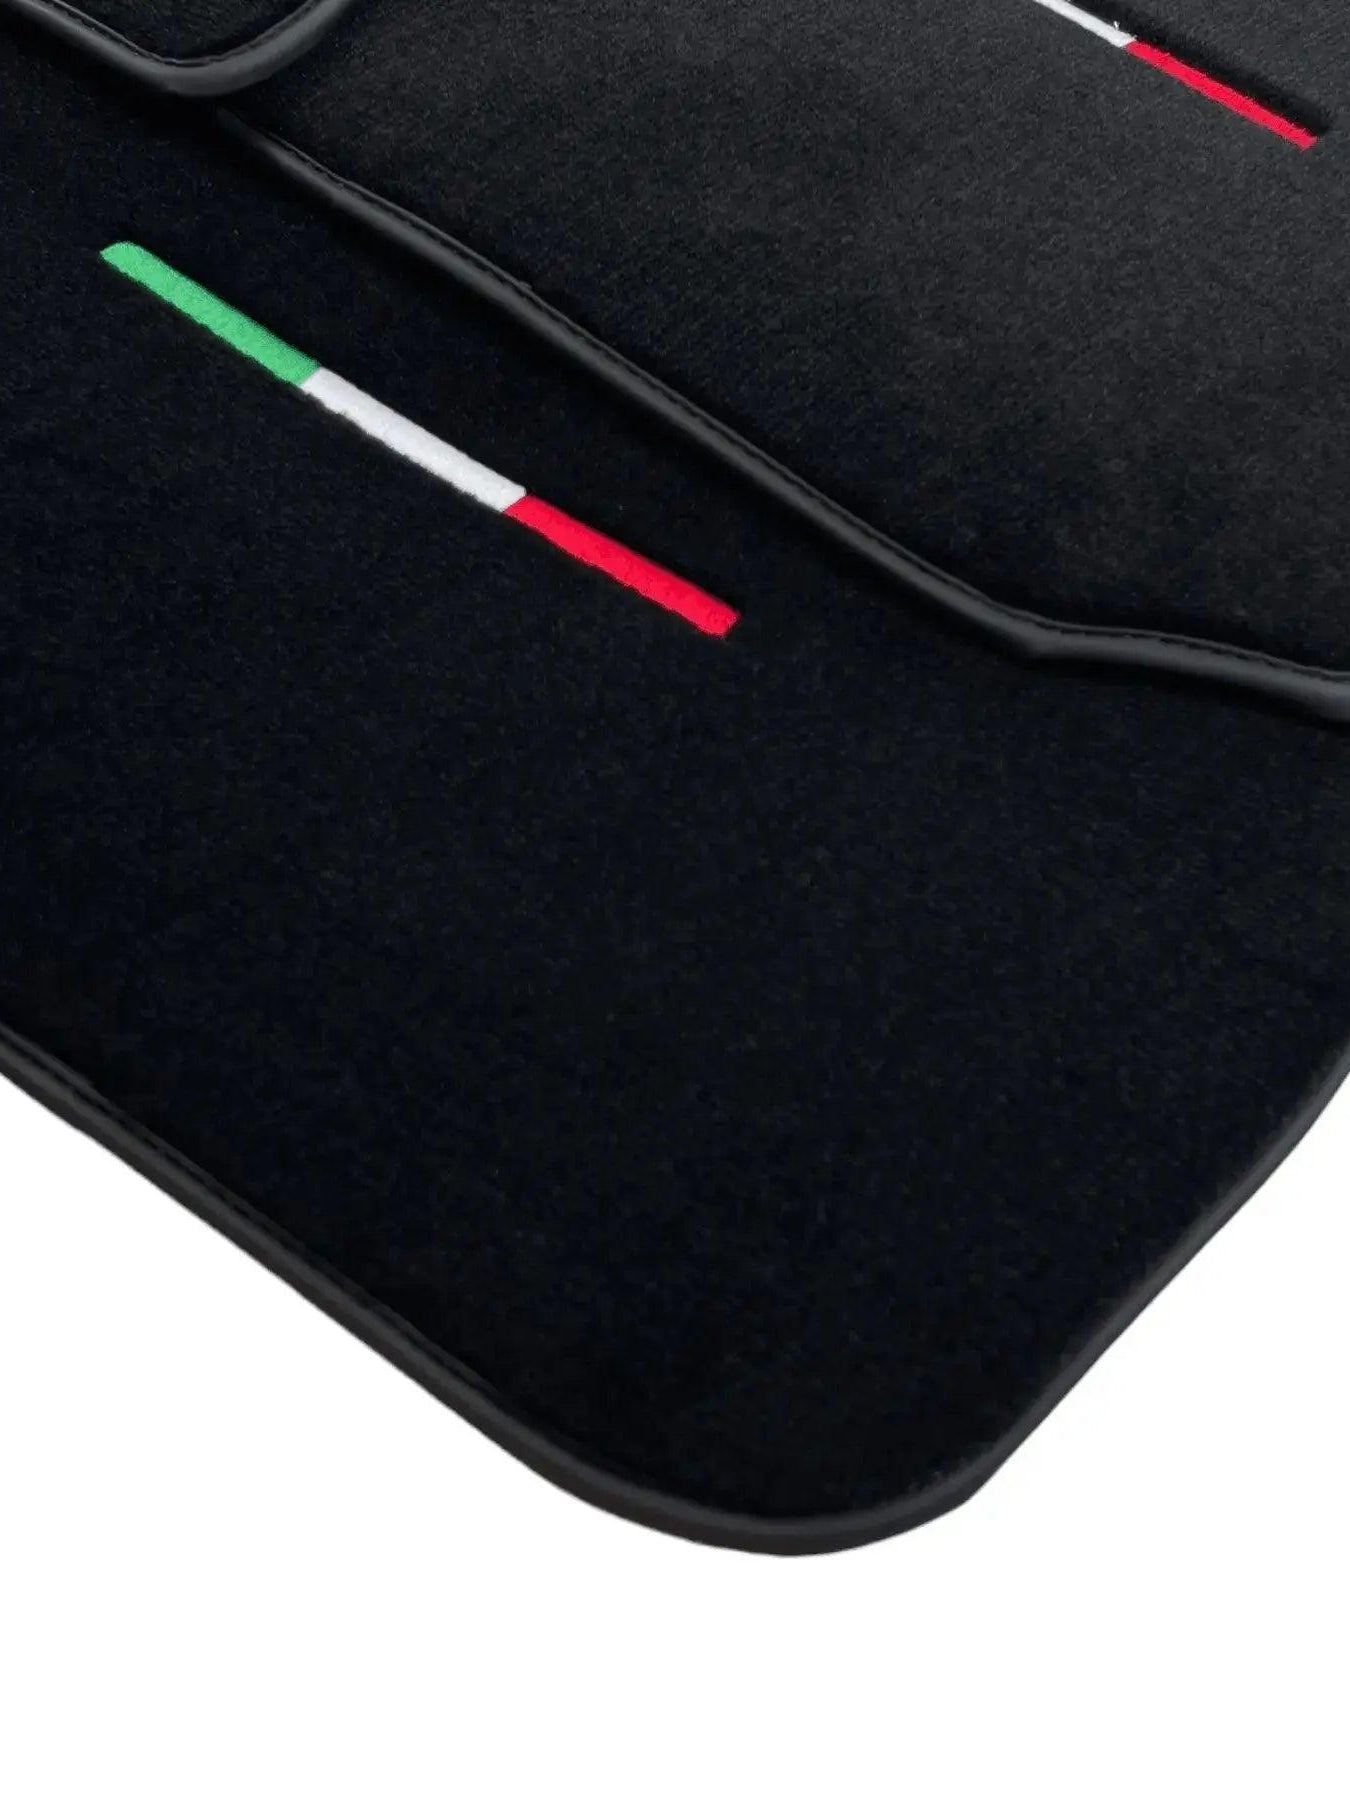 Black Floor Mats For Maserati Coupé (2001-2007) Italy Edition - AutoWin